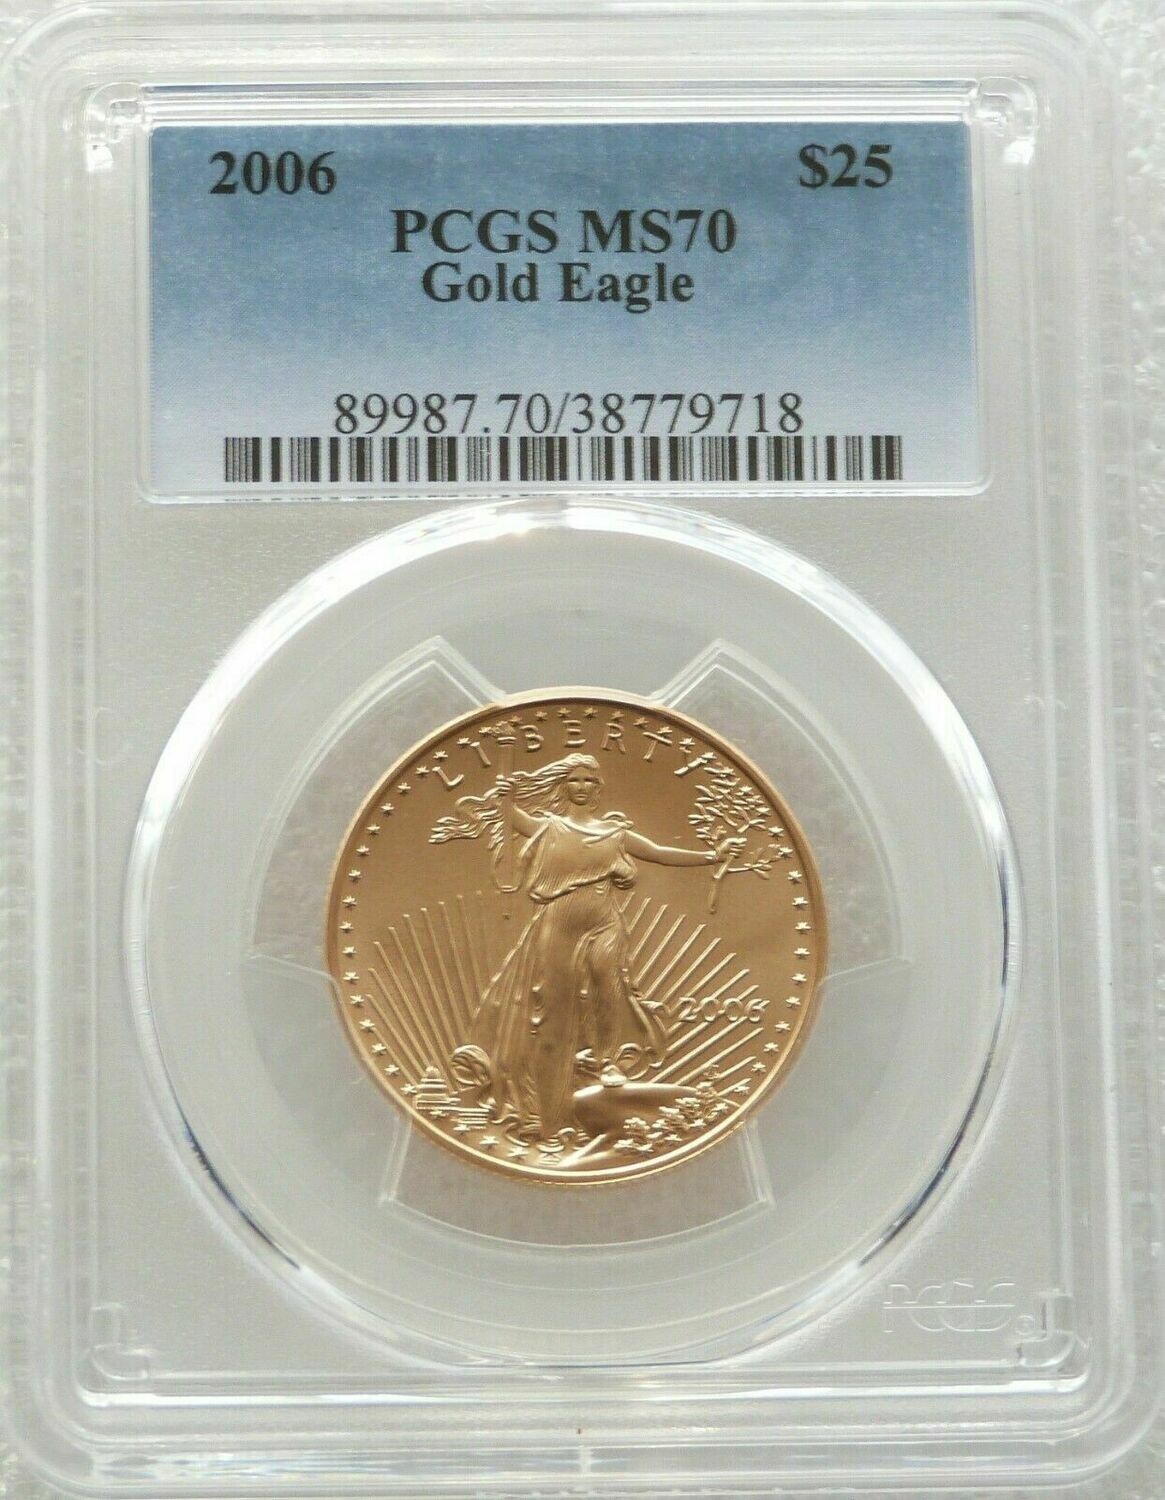 2006 American Eagle $25 Gold 1/2oz Coin PCGS MS70